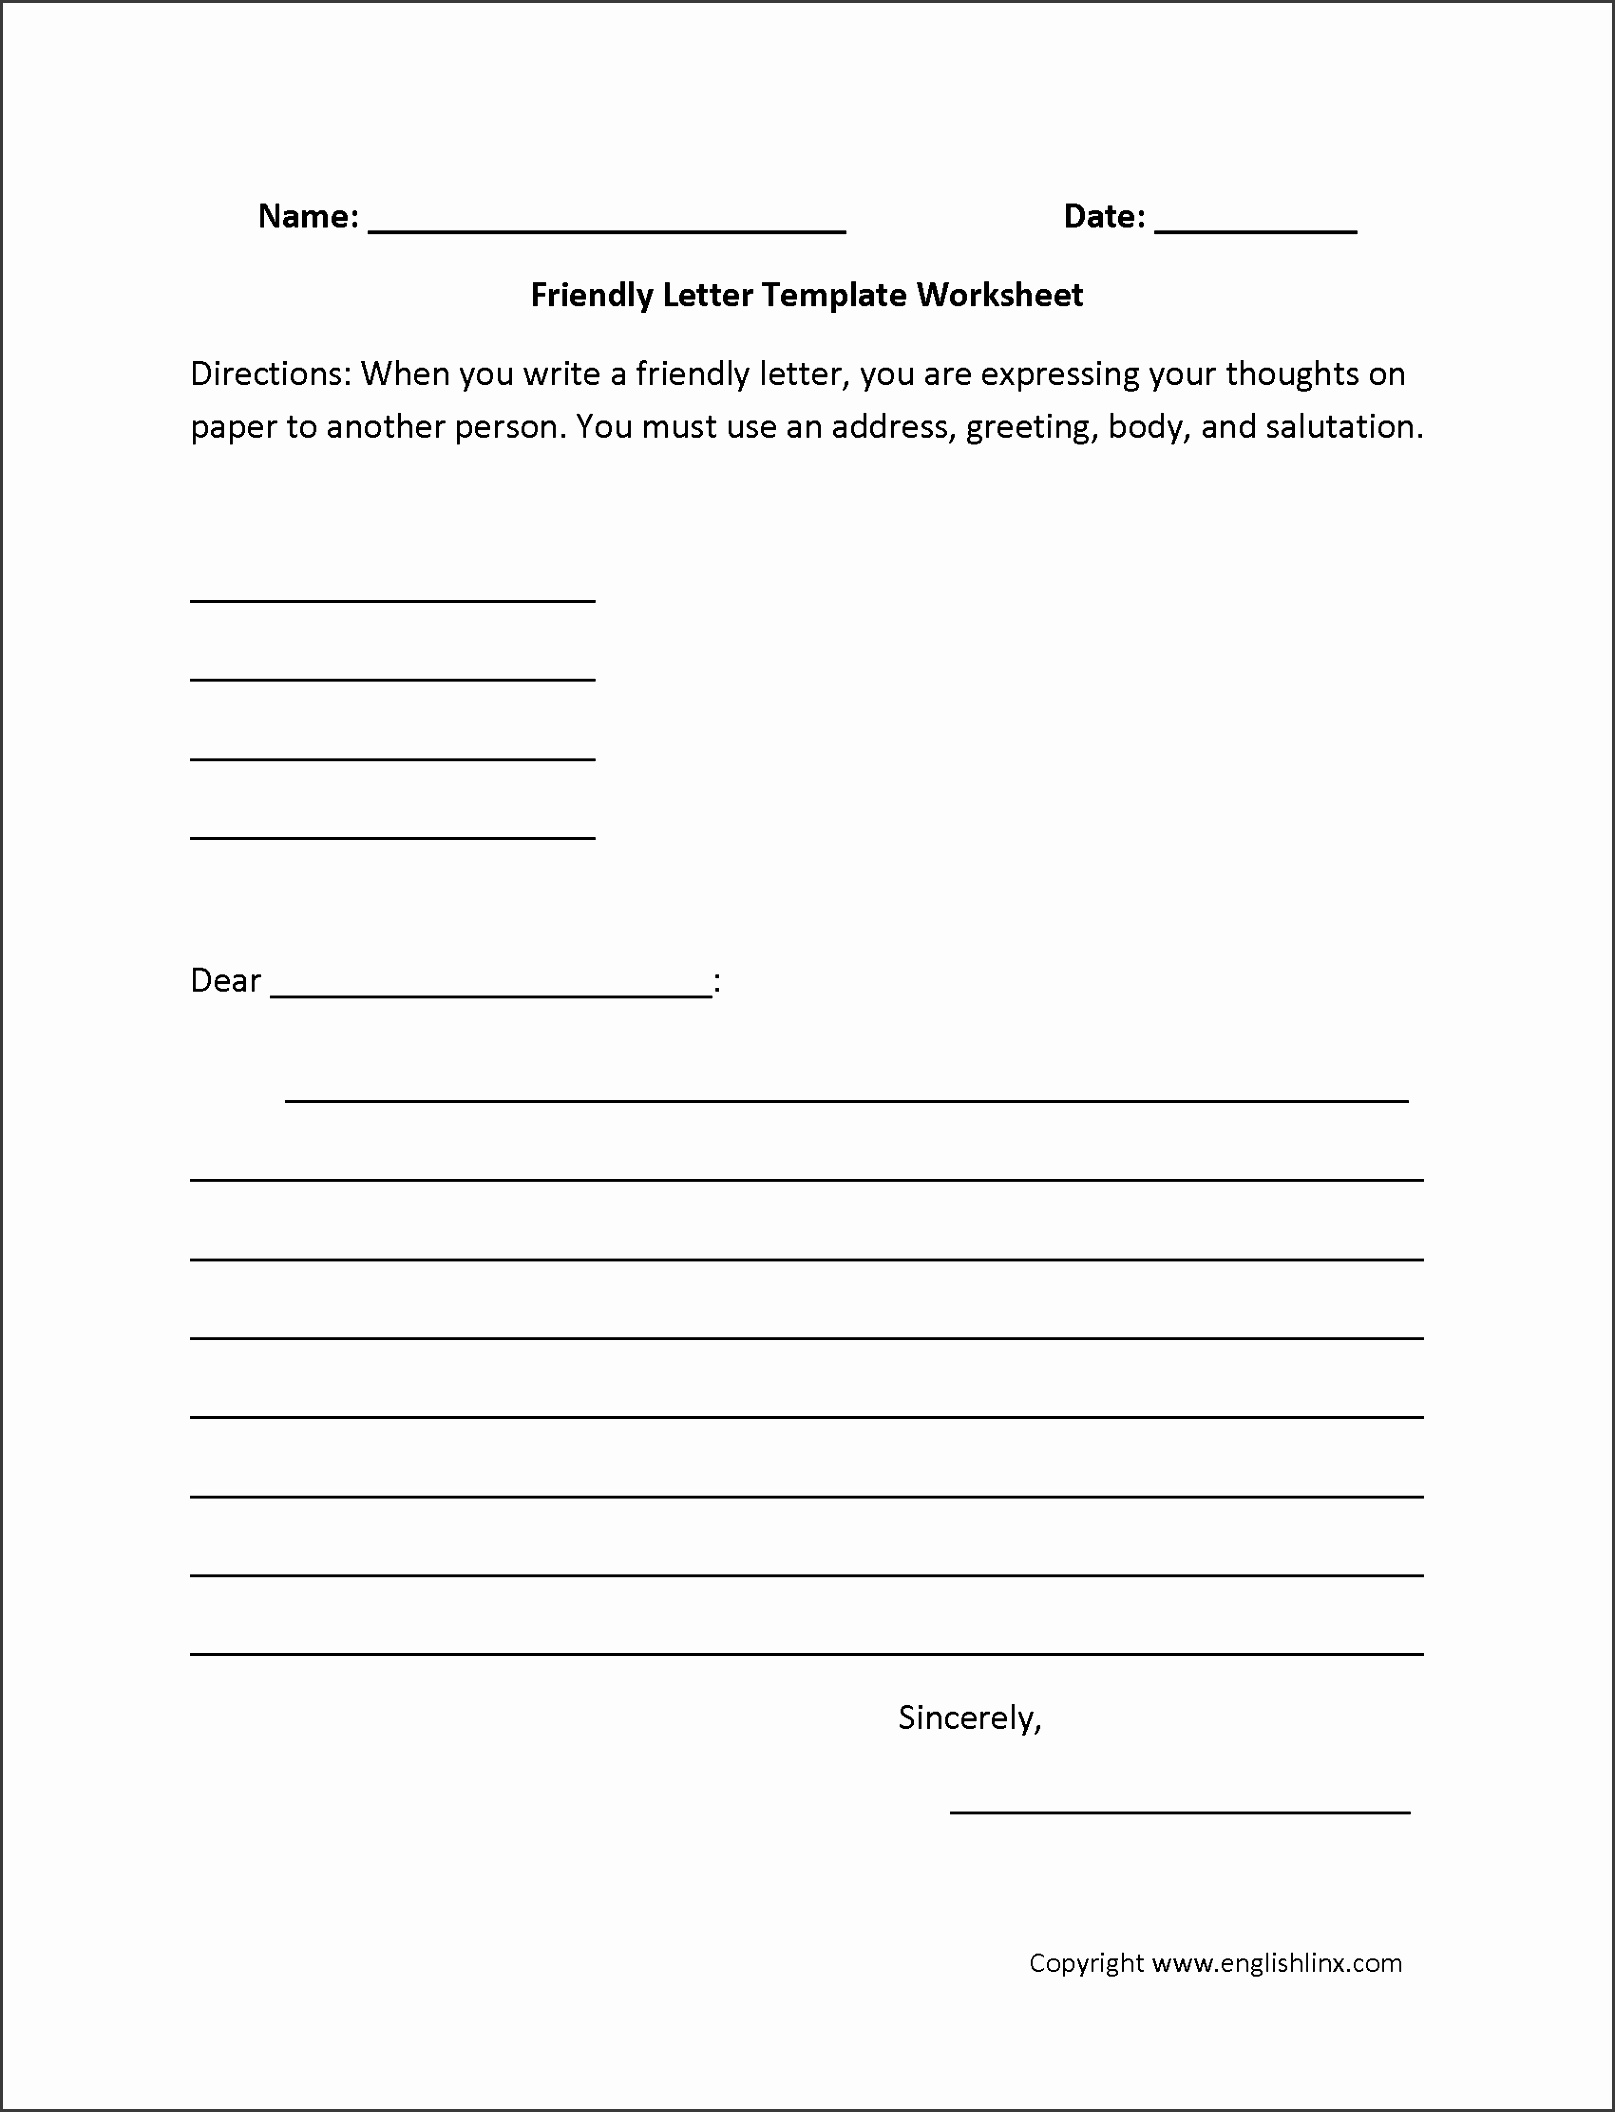 Friendly Letter Writing Worksheets